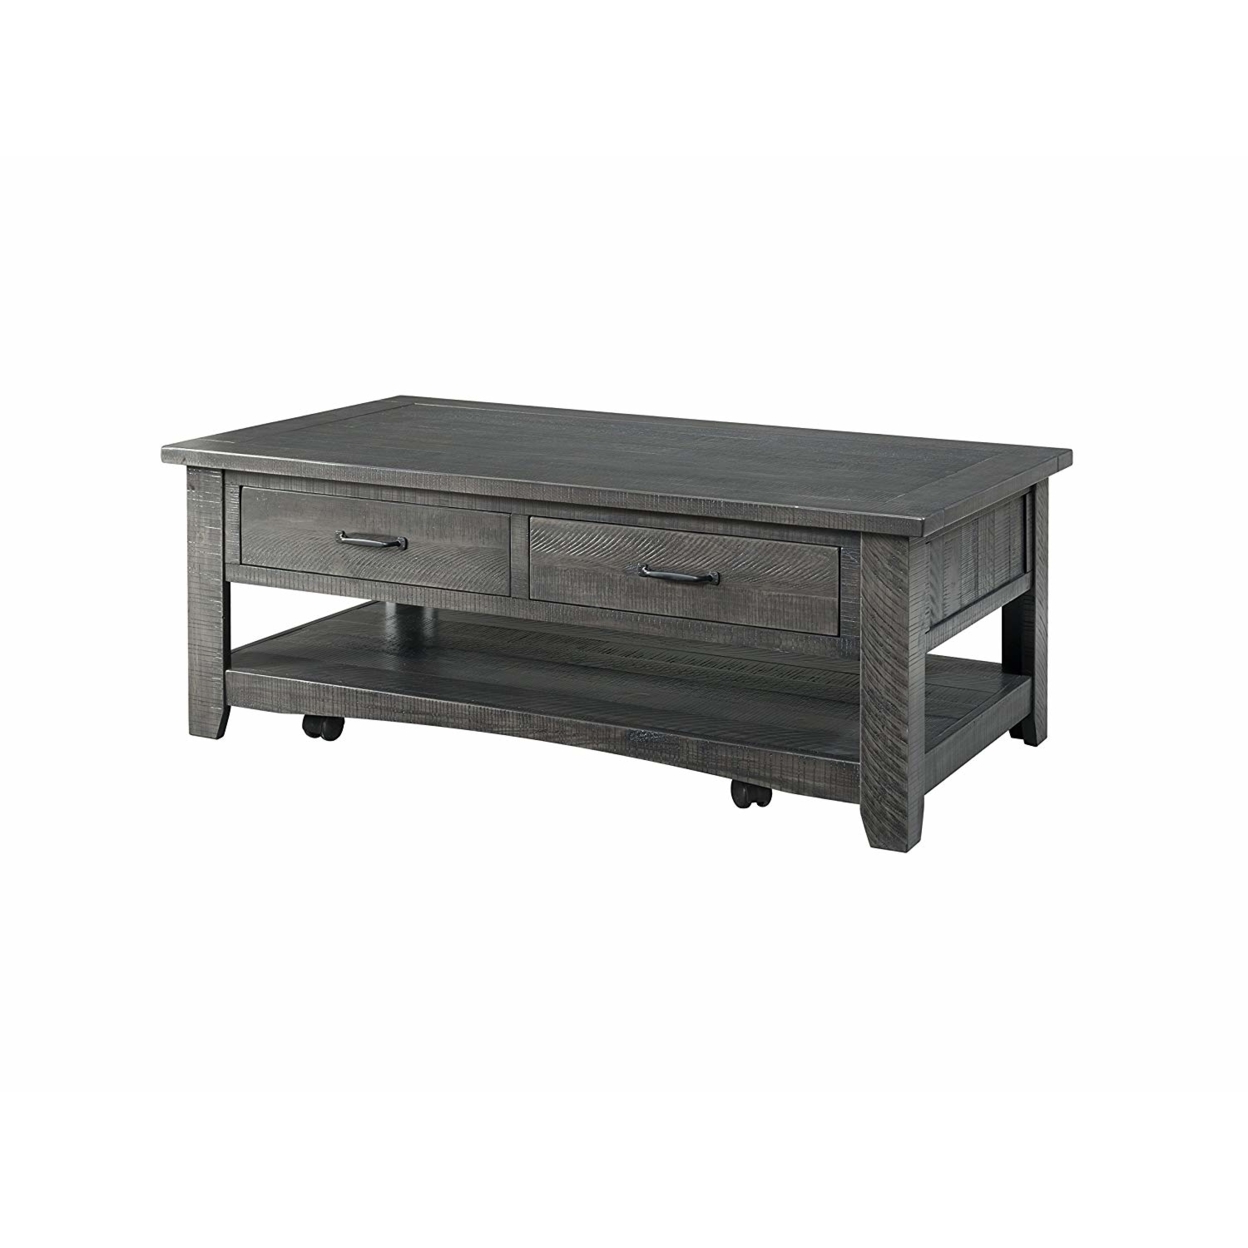 Wooden Coffee Table With Two Spacious Drawers, Gray- Saltoro Sherpi